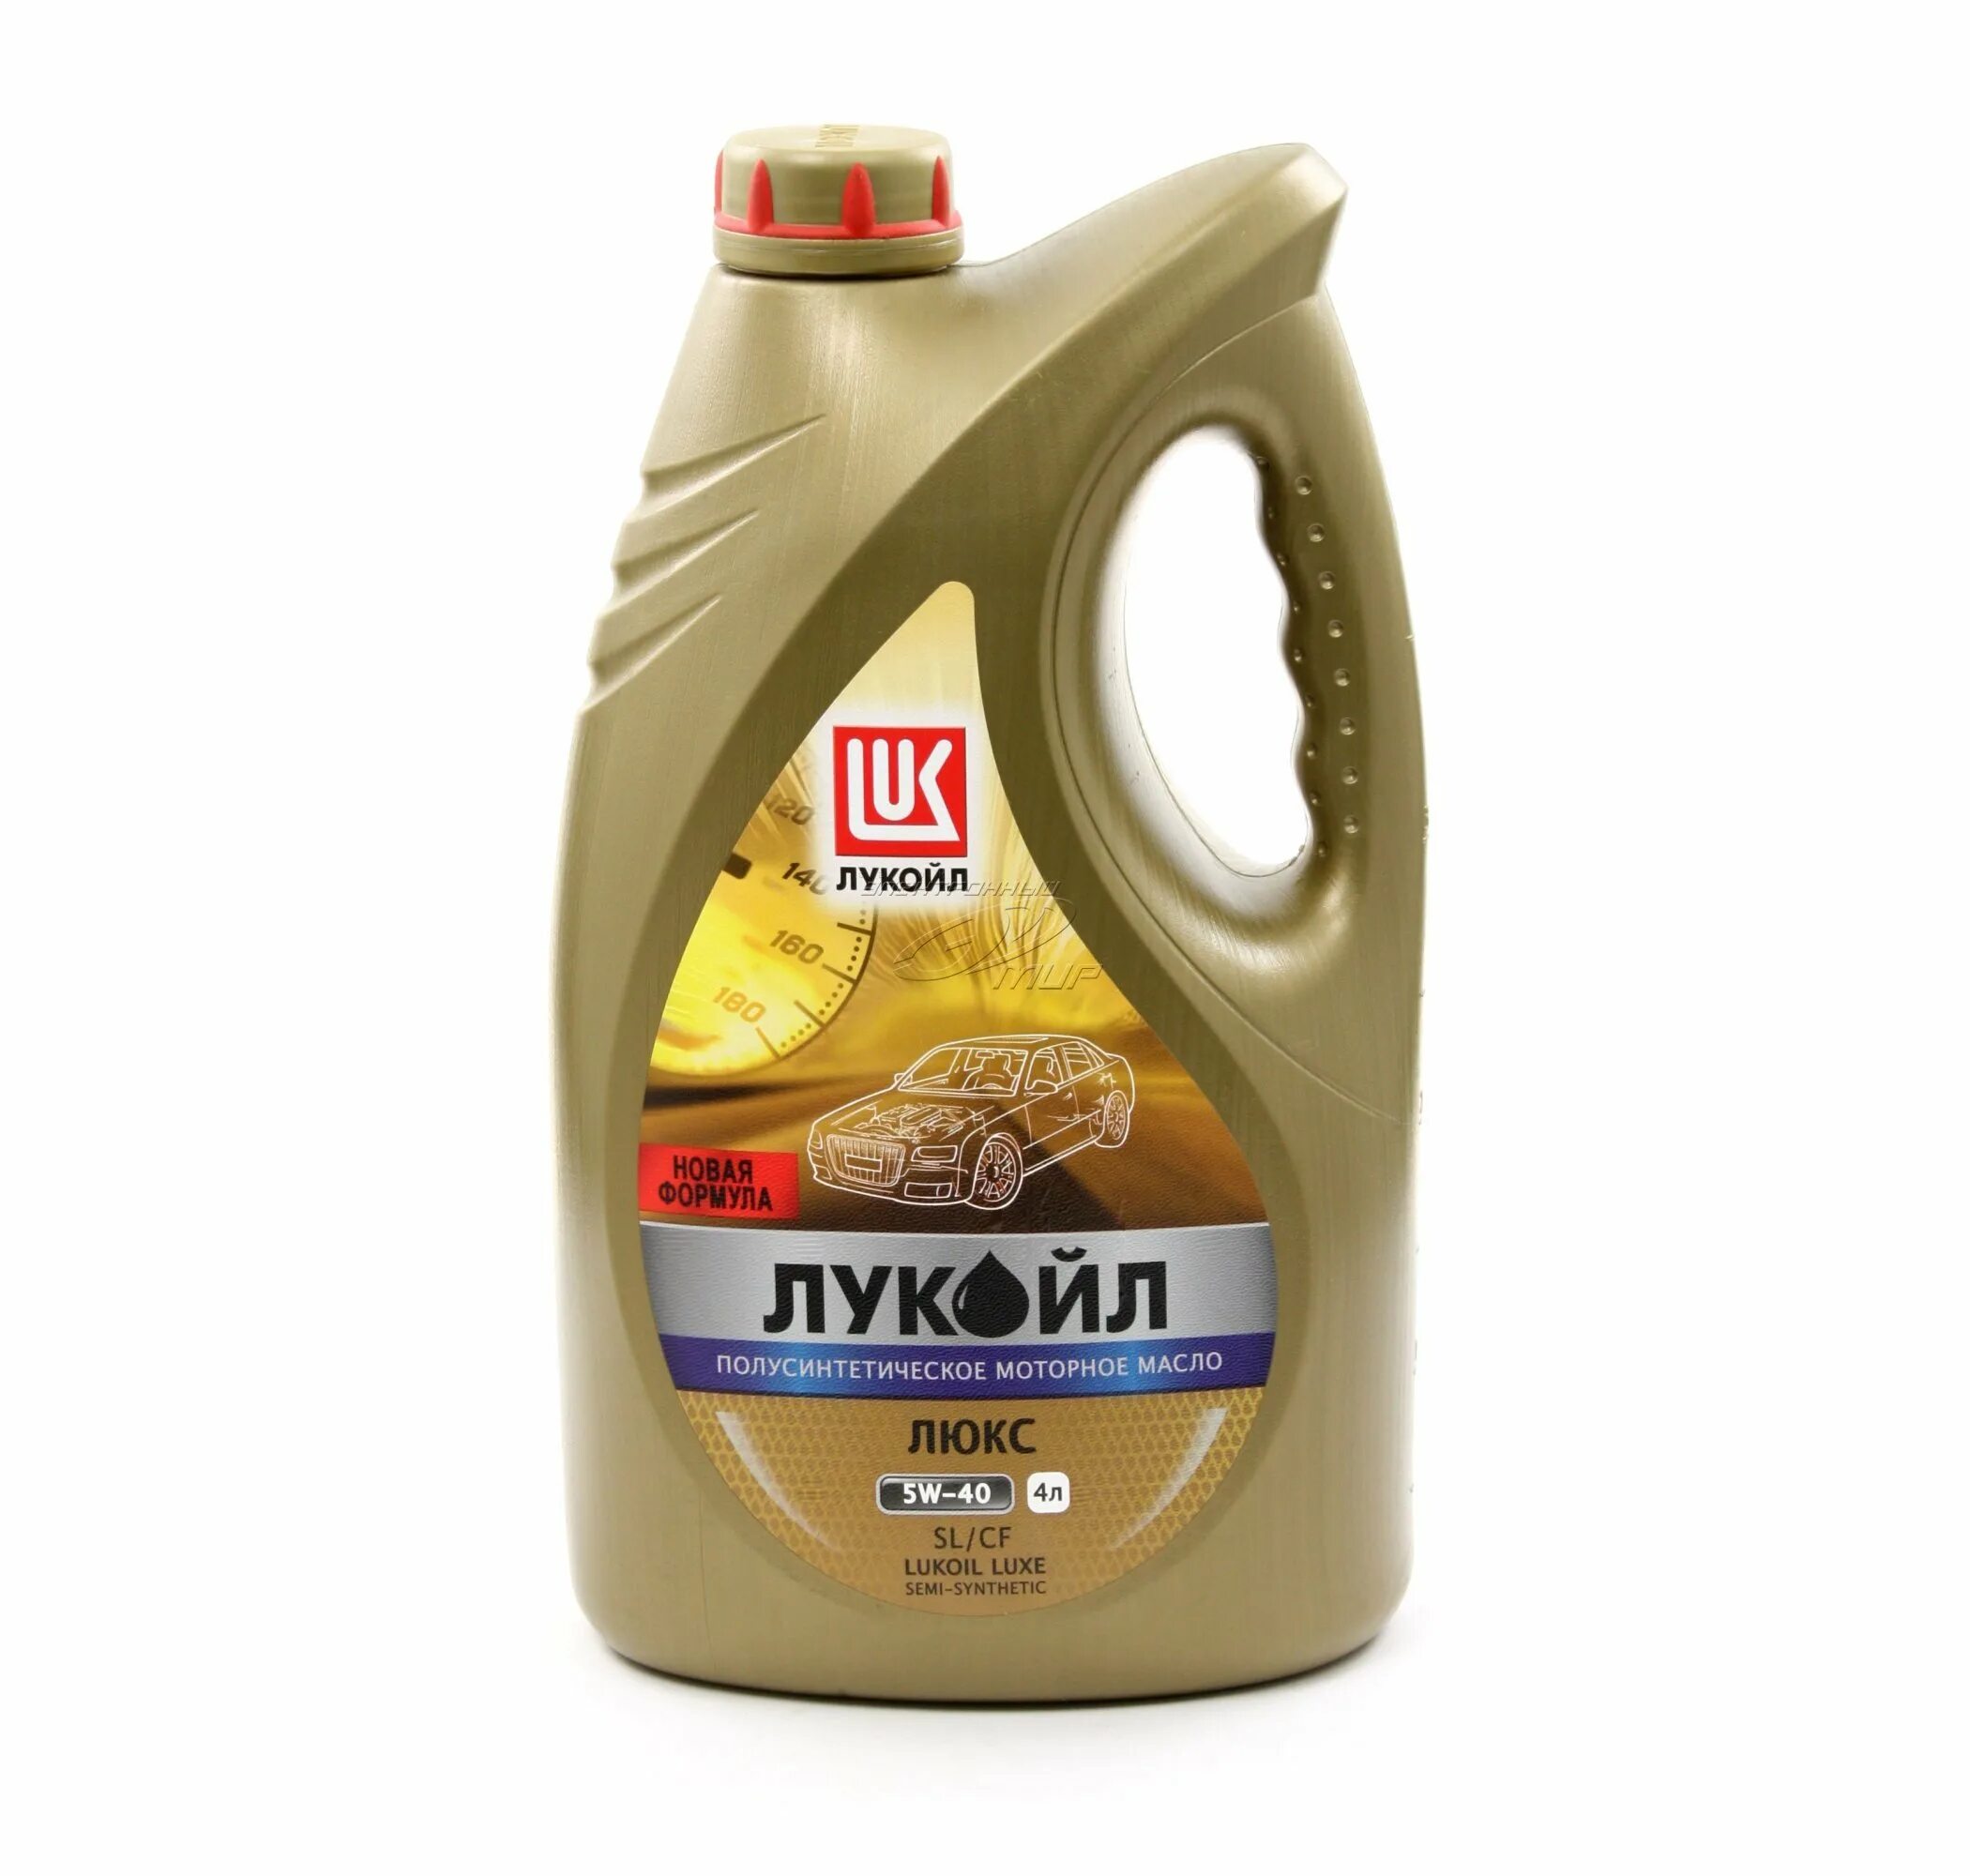 Моторное масло Лукойл 5w40 синтетика. Lukoil Luxe 5w-40. Лукойл Люкс 5в40 синтетика. Масло моторное Лукойл Люкс 5w40 синтетика.